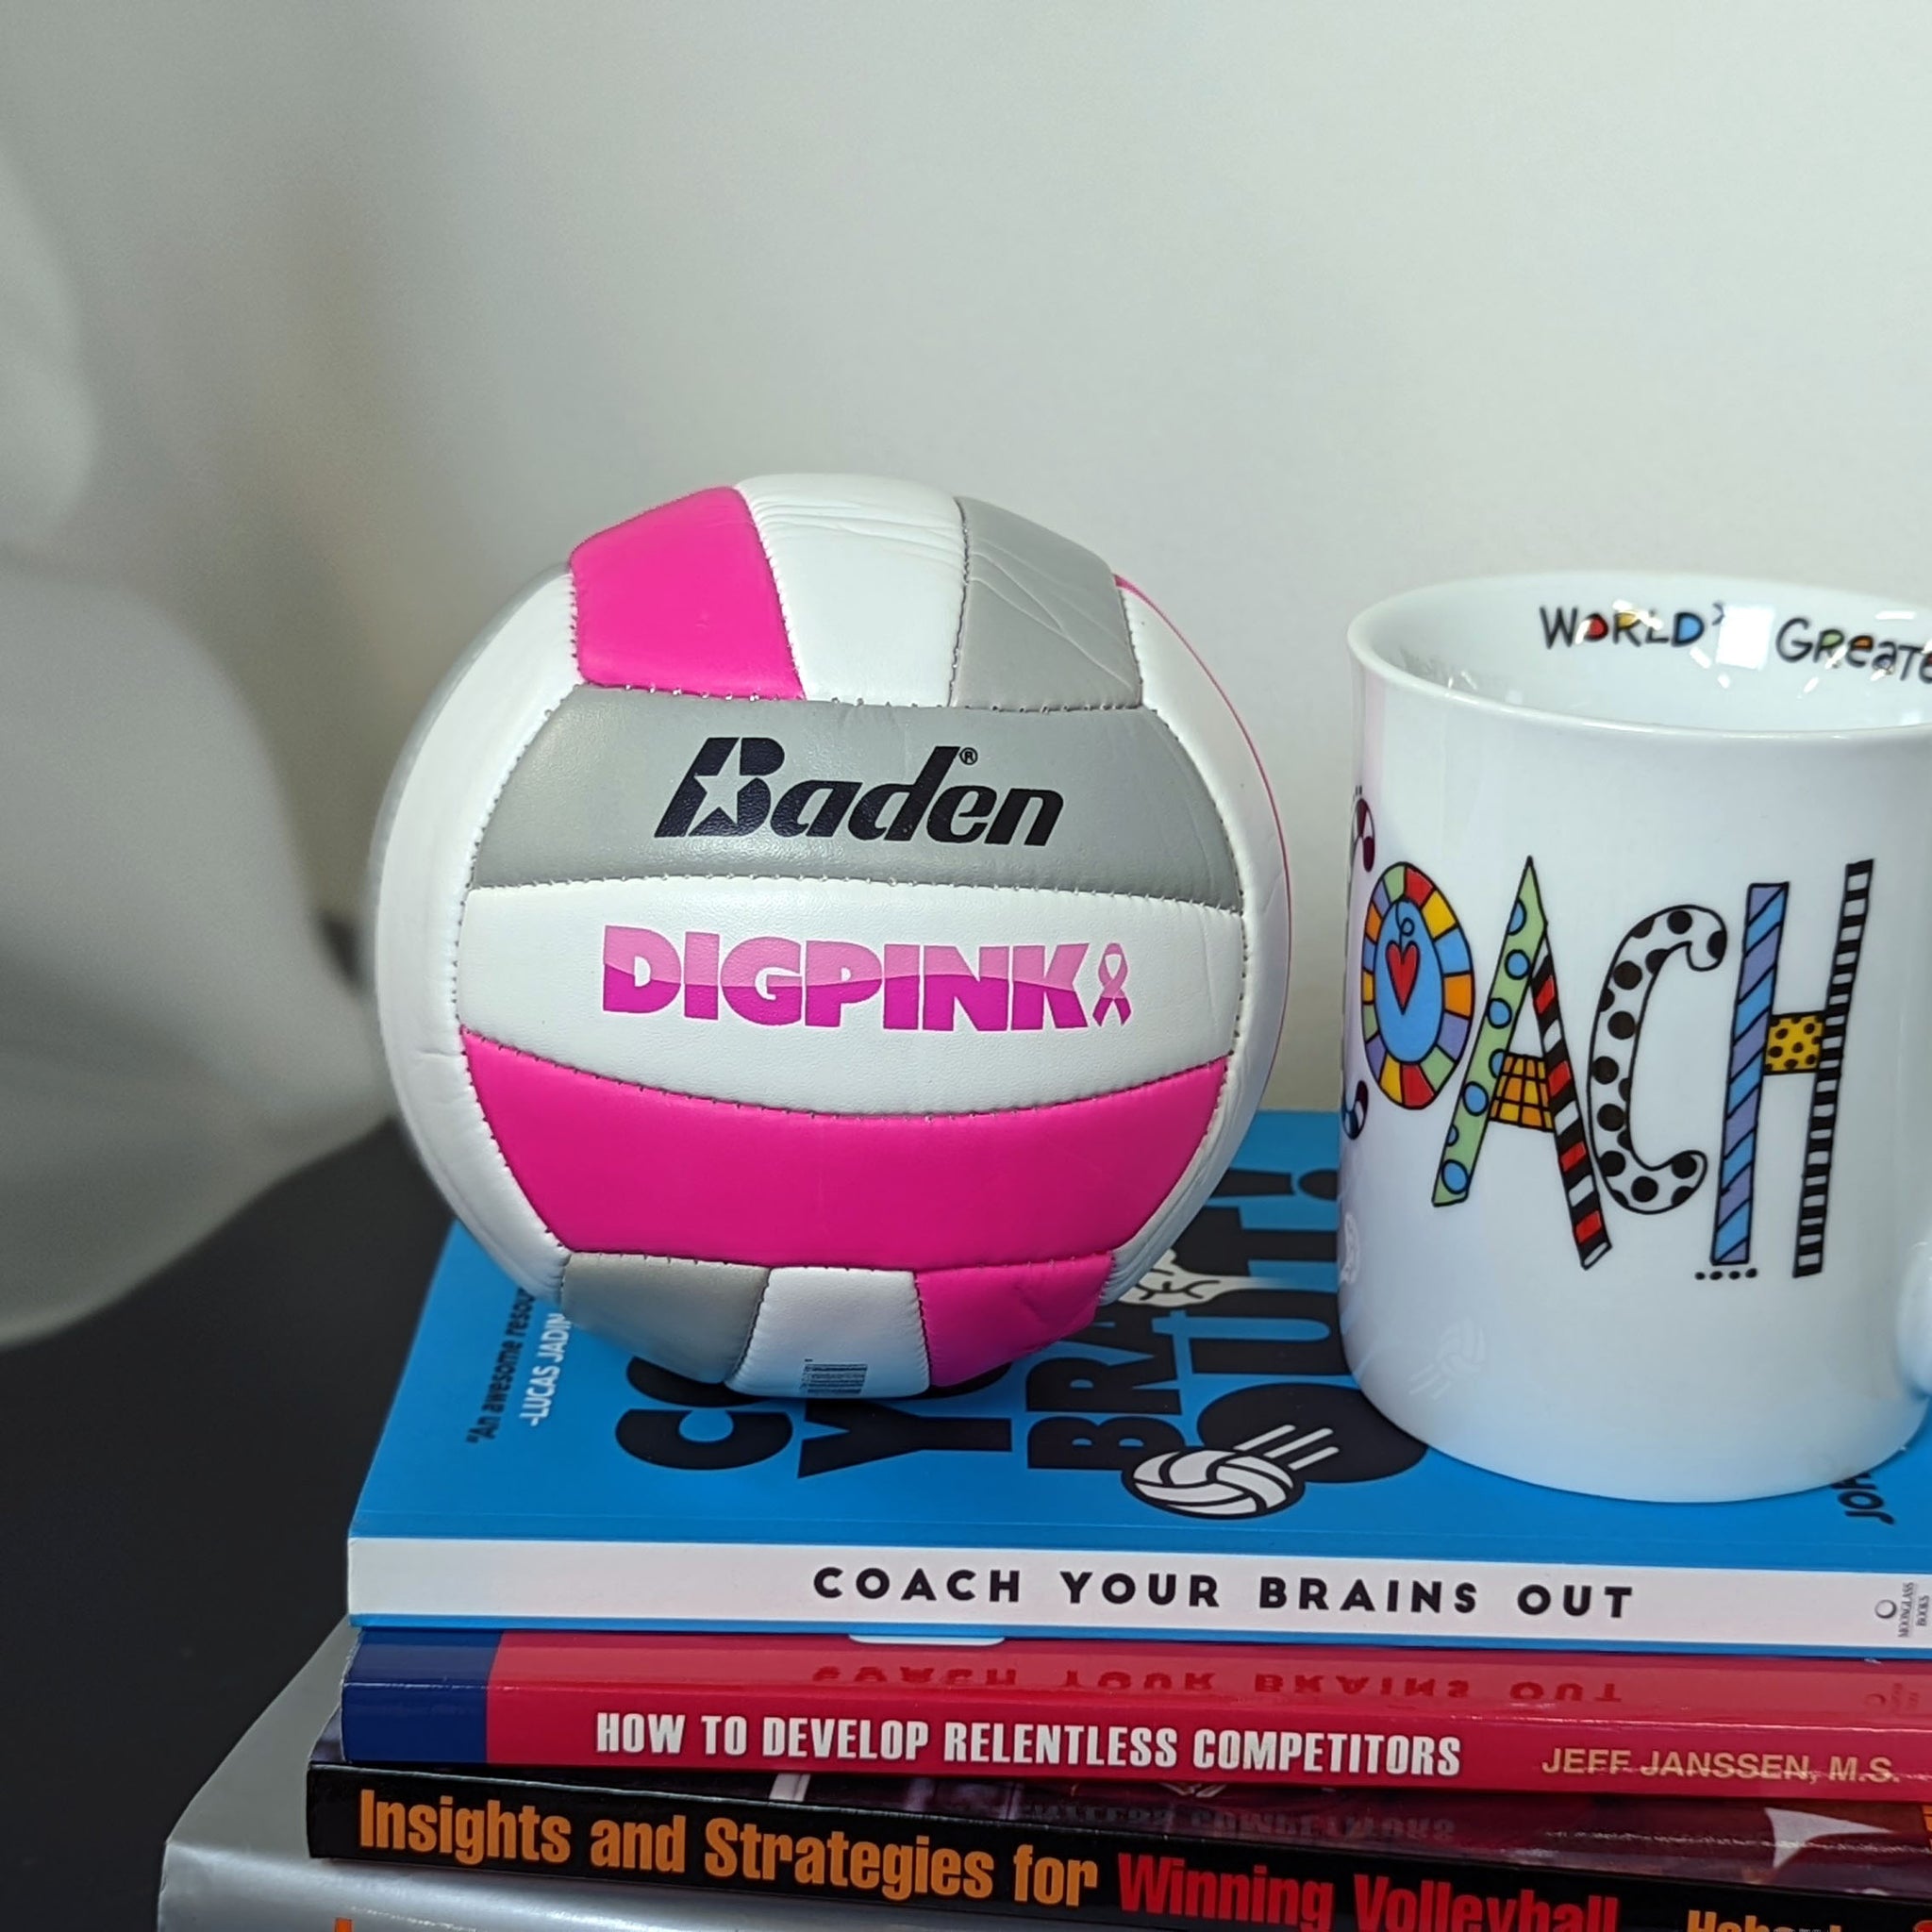 5 Inch Baden Mini Dig Pink® Volleyball with Dig Pink Logo